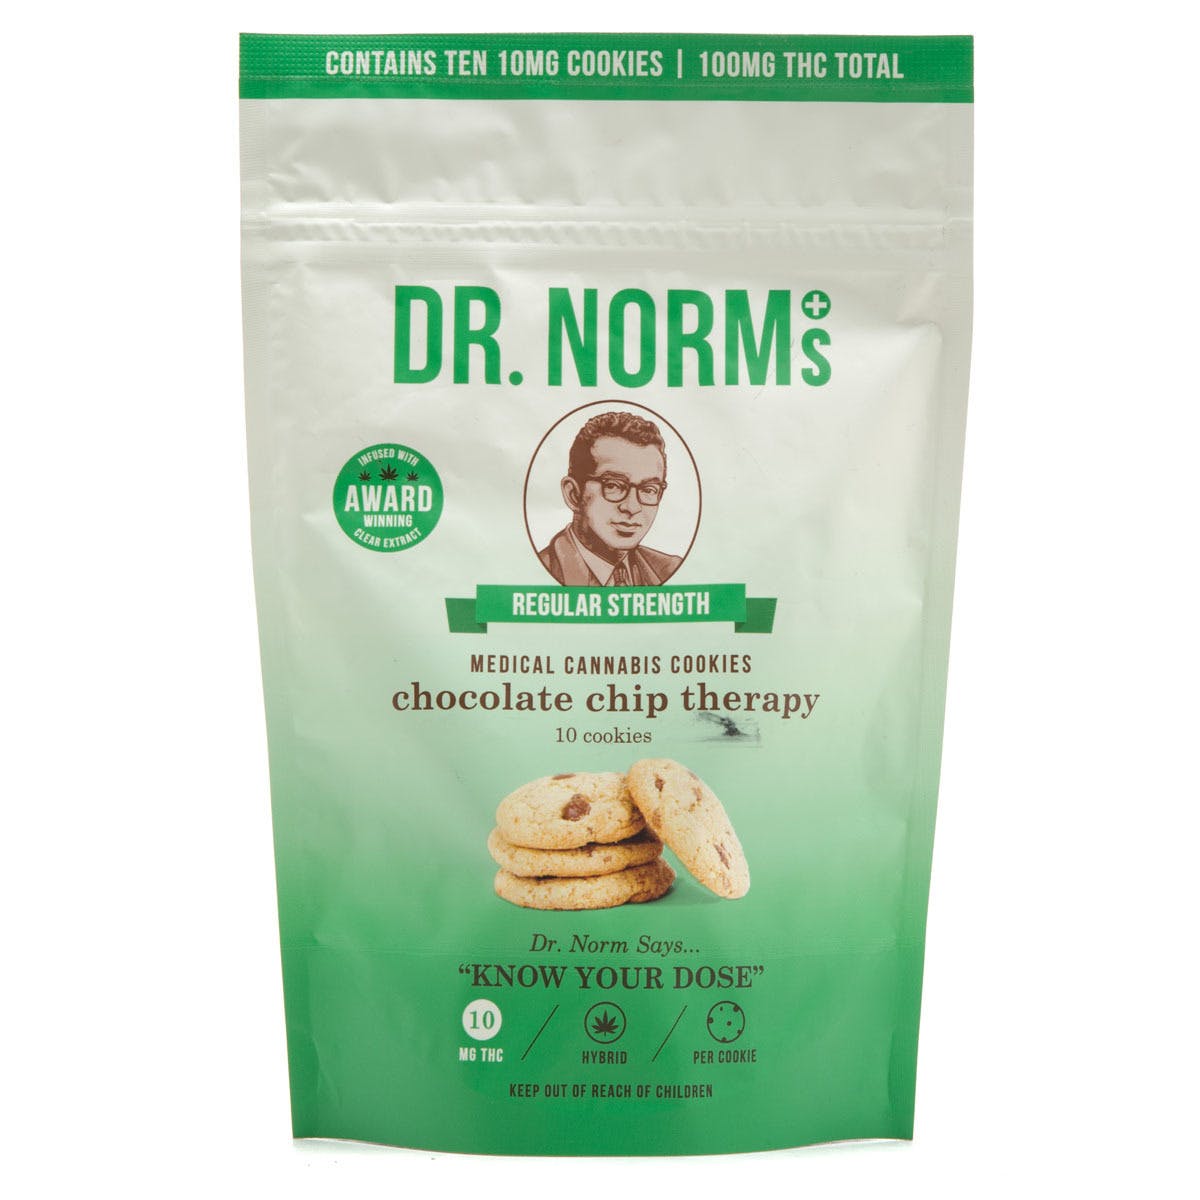 marijuana-dispensaries-compassion-union-in-north-hollywood-10mg-choco-chip-therapy-bag-100mg-total